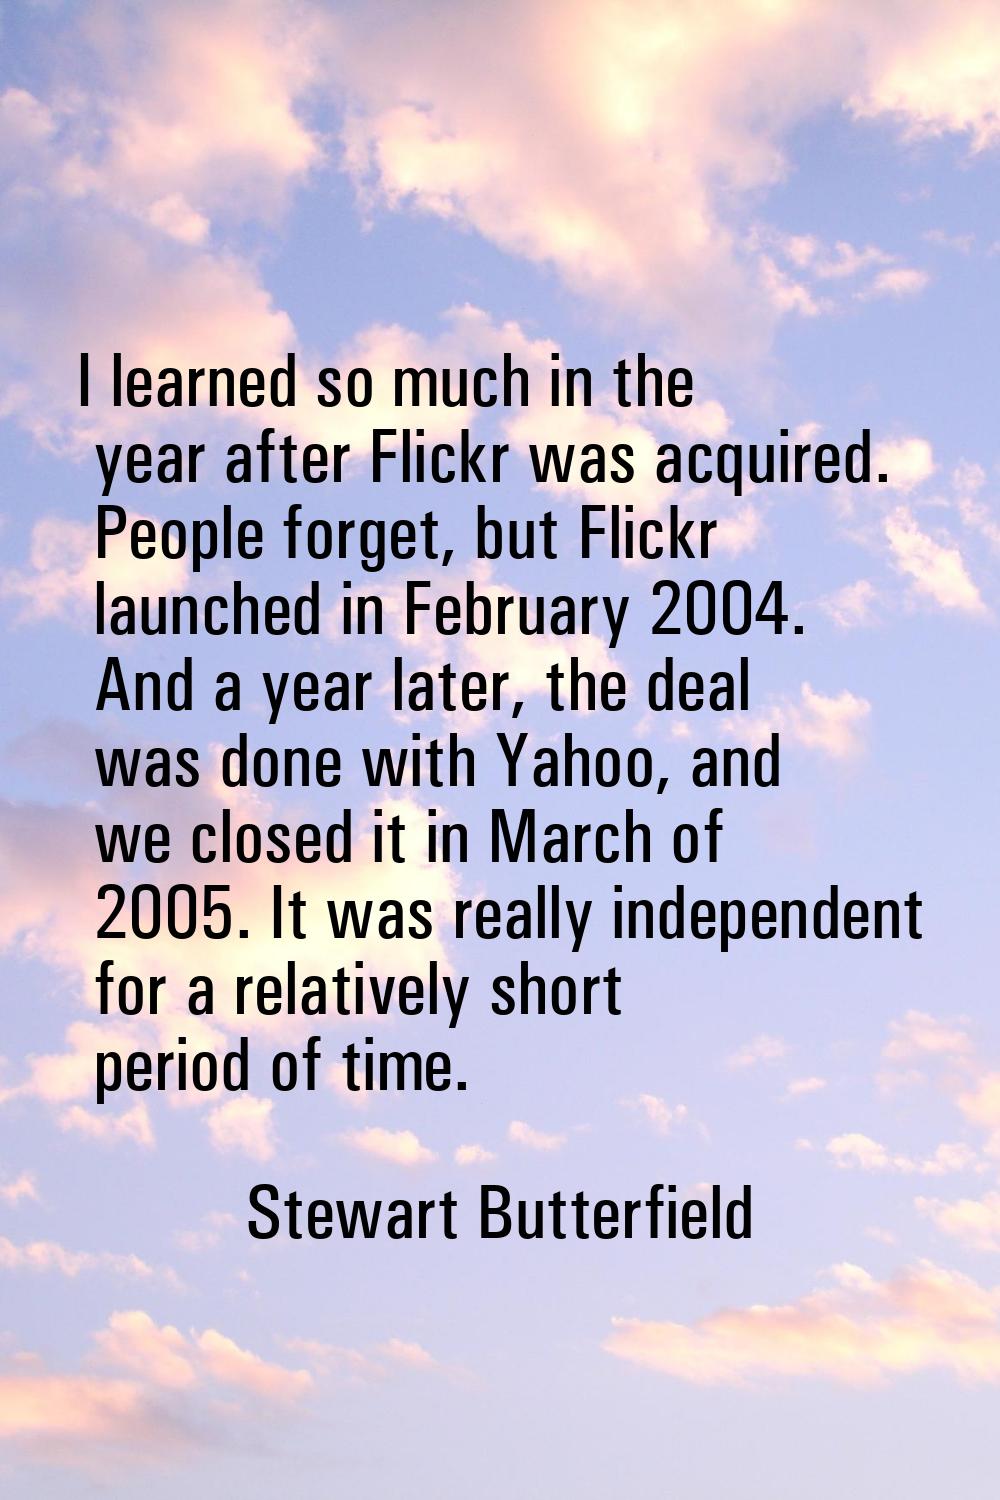 I learned so much in the year after Flickr was acquired. People forget, but Flickr launched in Febr